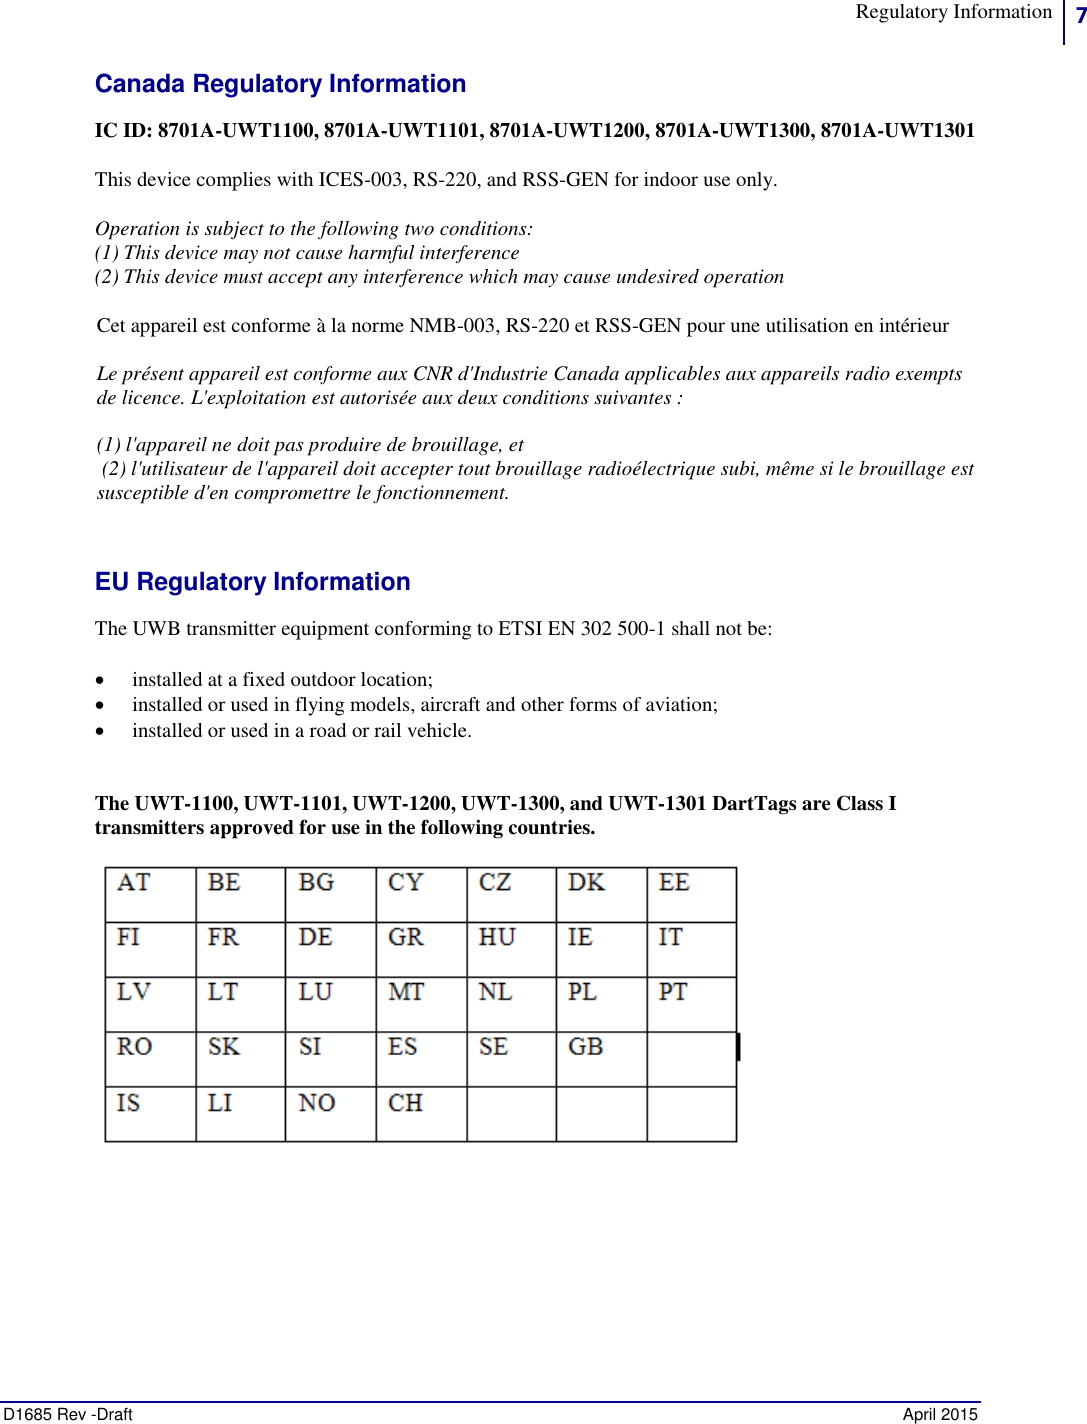 Regulatory Information   7  D1685 Rev -Draft    April 2015  Canada Regulatory Information IC ID: 8701A-UWT1100, 8701A-UWT1101, 8701A-UWT1200, 8701A-UWT1300, 8701A-UWT1301 This device complies with ICES-003, RS-220, and RSS-GEN for indoor use only. Operation is subject to the following two conditions:  (1) This device may not cause harmful interference  (2) This device must accept any interference which may cause undesired operation Cet appareil est conforme à la norme NMB-003, RS-220 et RSS-GEN pour une utilisation en intérieur  Le présent appareil est conforme aux CNR d&apos;Industrie Canada applicables aux appareils radio exempts de licence. L&apos;exploitation est autorisée aux deux conditions suivantes :   (1) l&apos;appareil ne doit pas produire de brouillage, et  (2) l&apos;utilisateur de l&apos;appareil doit accepter tout brouillage radioélectrique subi, même si le brouillage est susceptible d&apos;en compromettre le fonctionnement. EU Regulatory Information The UWB transmitter equipment conforming to ETSI EN 302 500-1 shall not be:  installed at a fixed outdoor location;  installed or used in flying models, aircraft and other forms of aviation;  installed or used in a road or rail vehicle.  The UWT-1100, UWT-1101, UWT-1200, UWT-1300, and UWT-1301 DartTags are Class I transmitters approved for use in the following countries.     